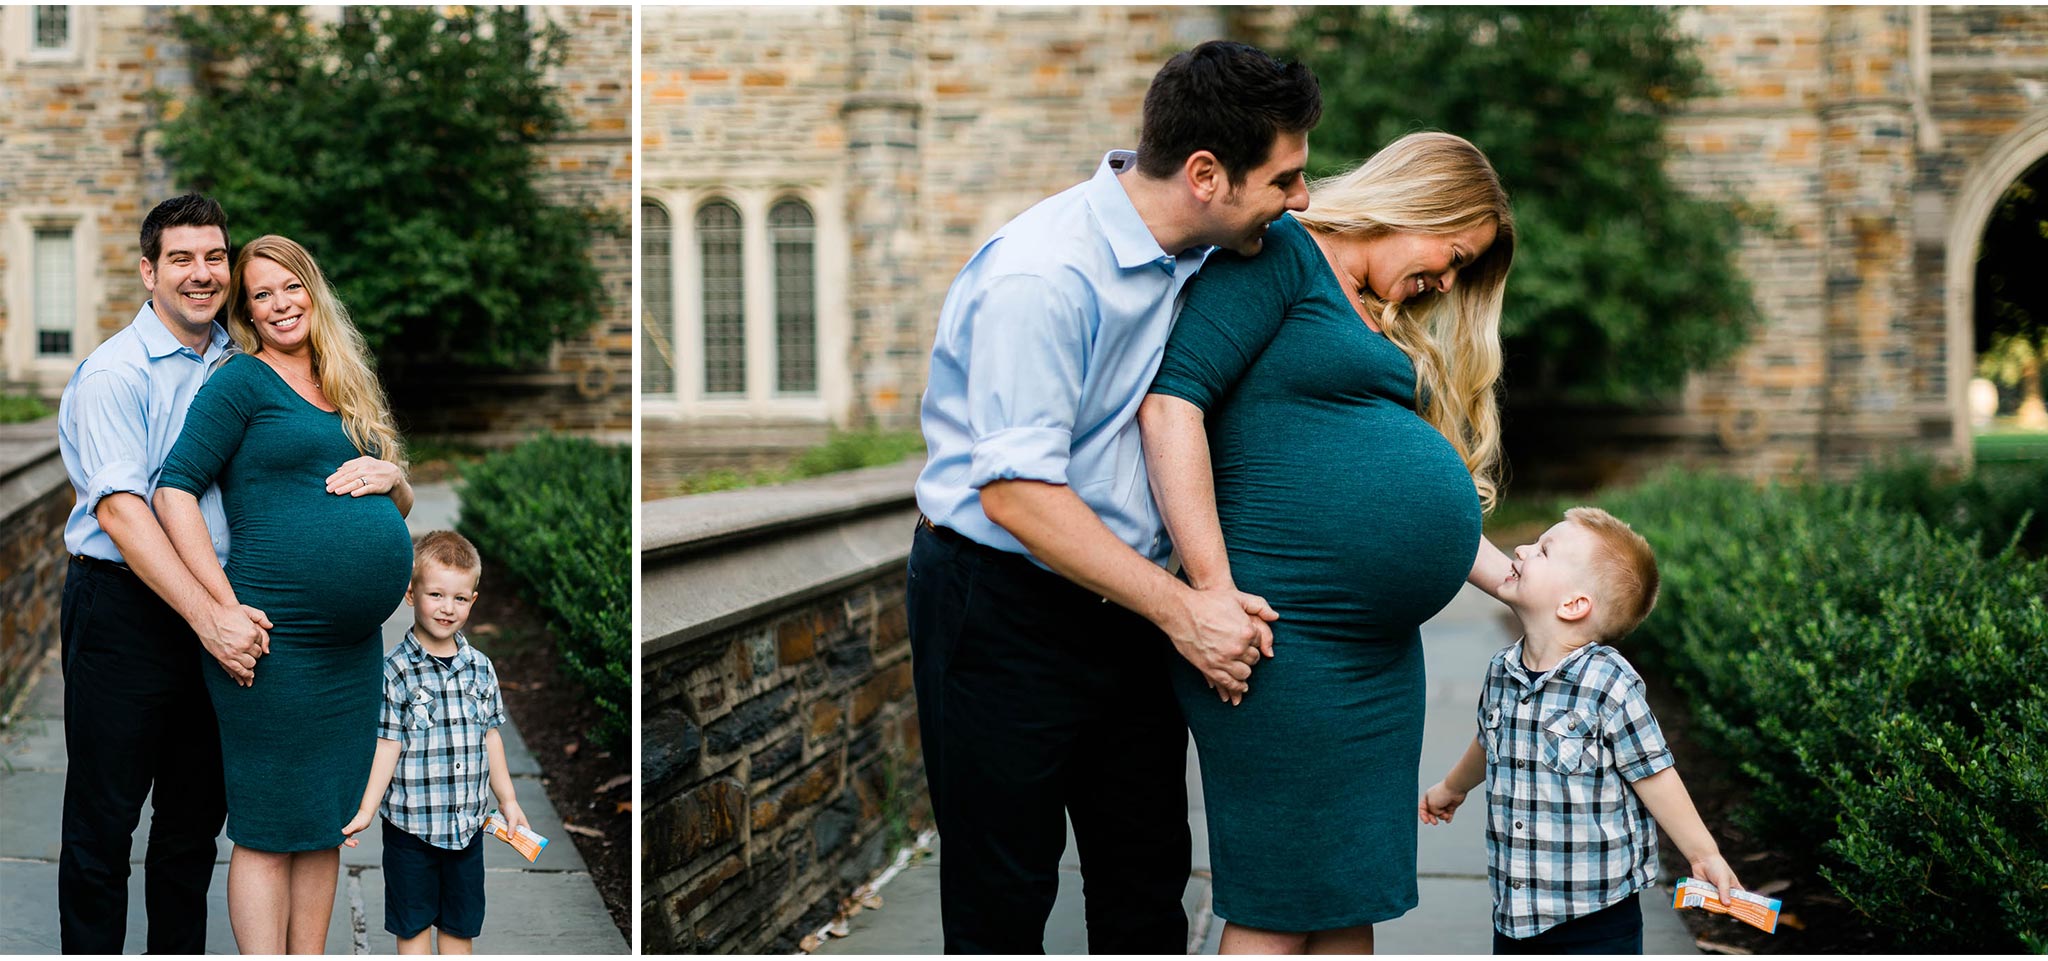 Little boy with mom and dad | Durham Maternity Photographer | By G. Lin Photography